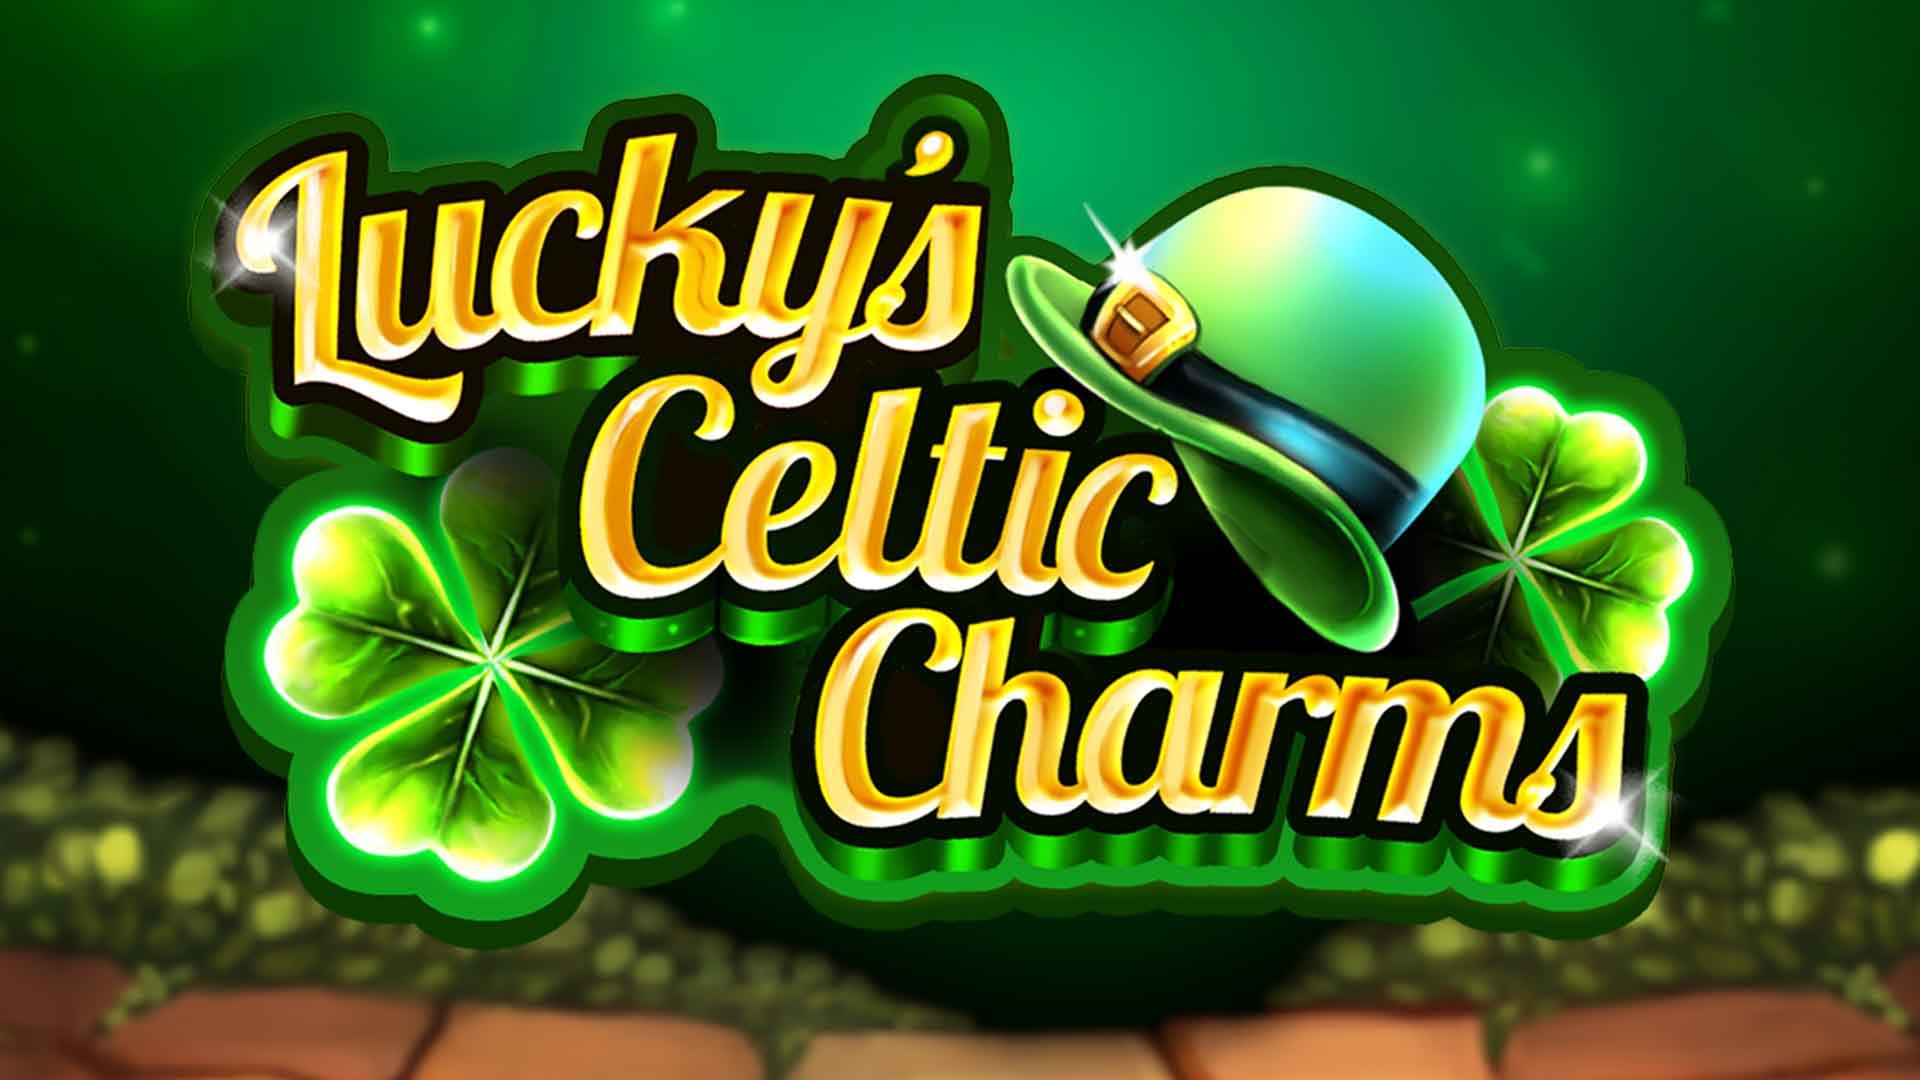 Lucky's Celtic Charms